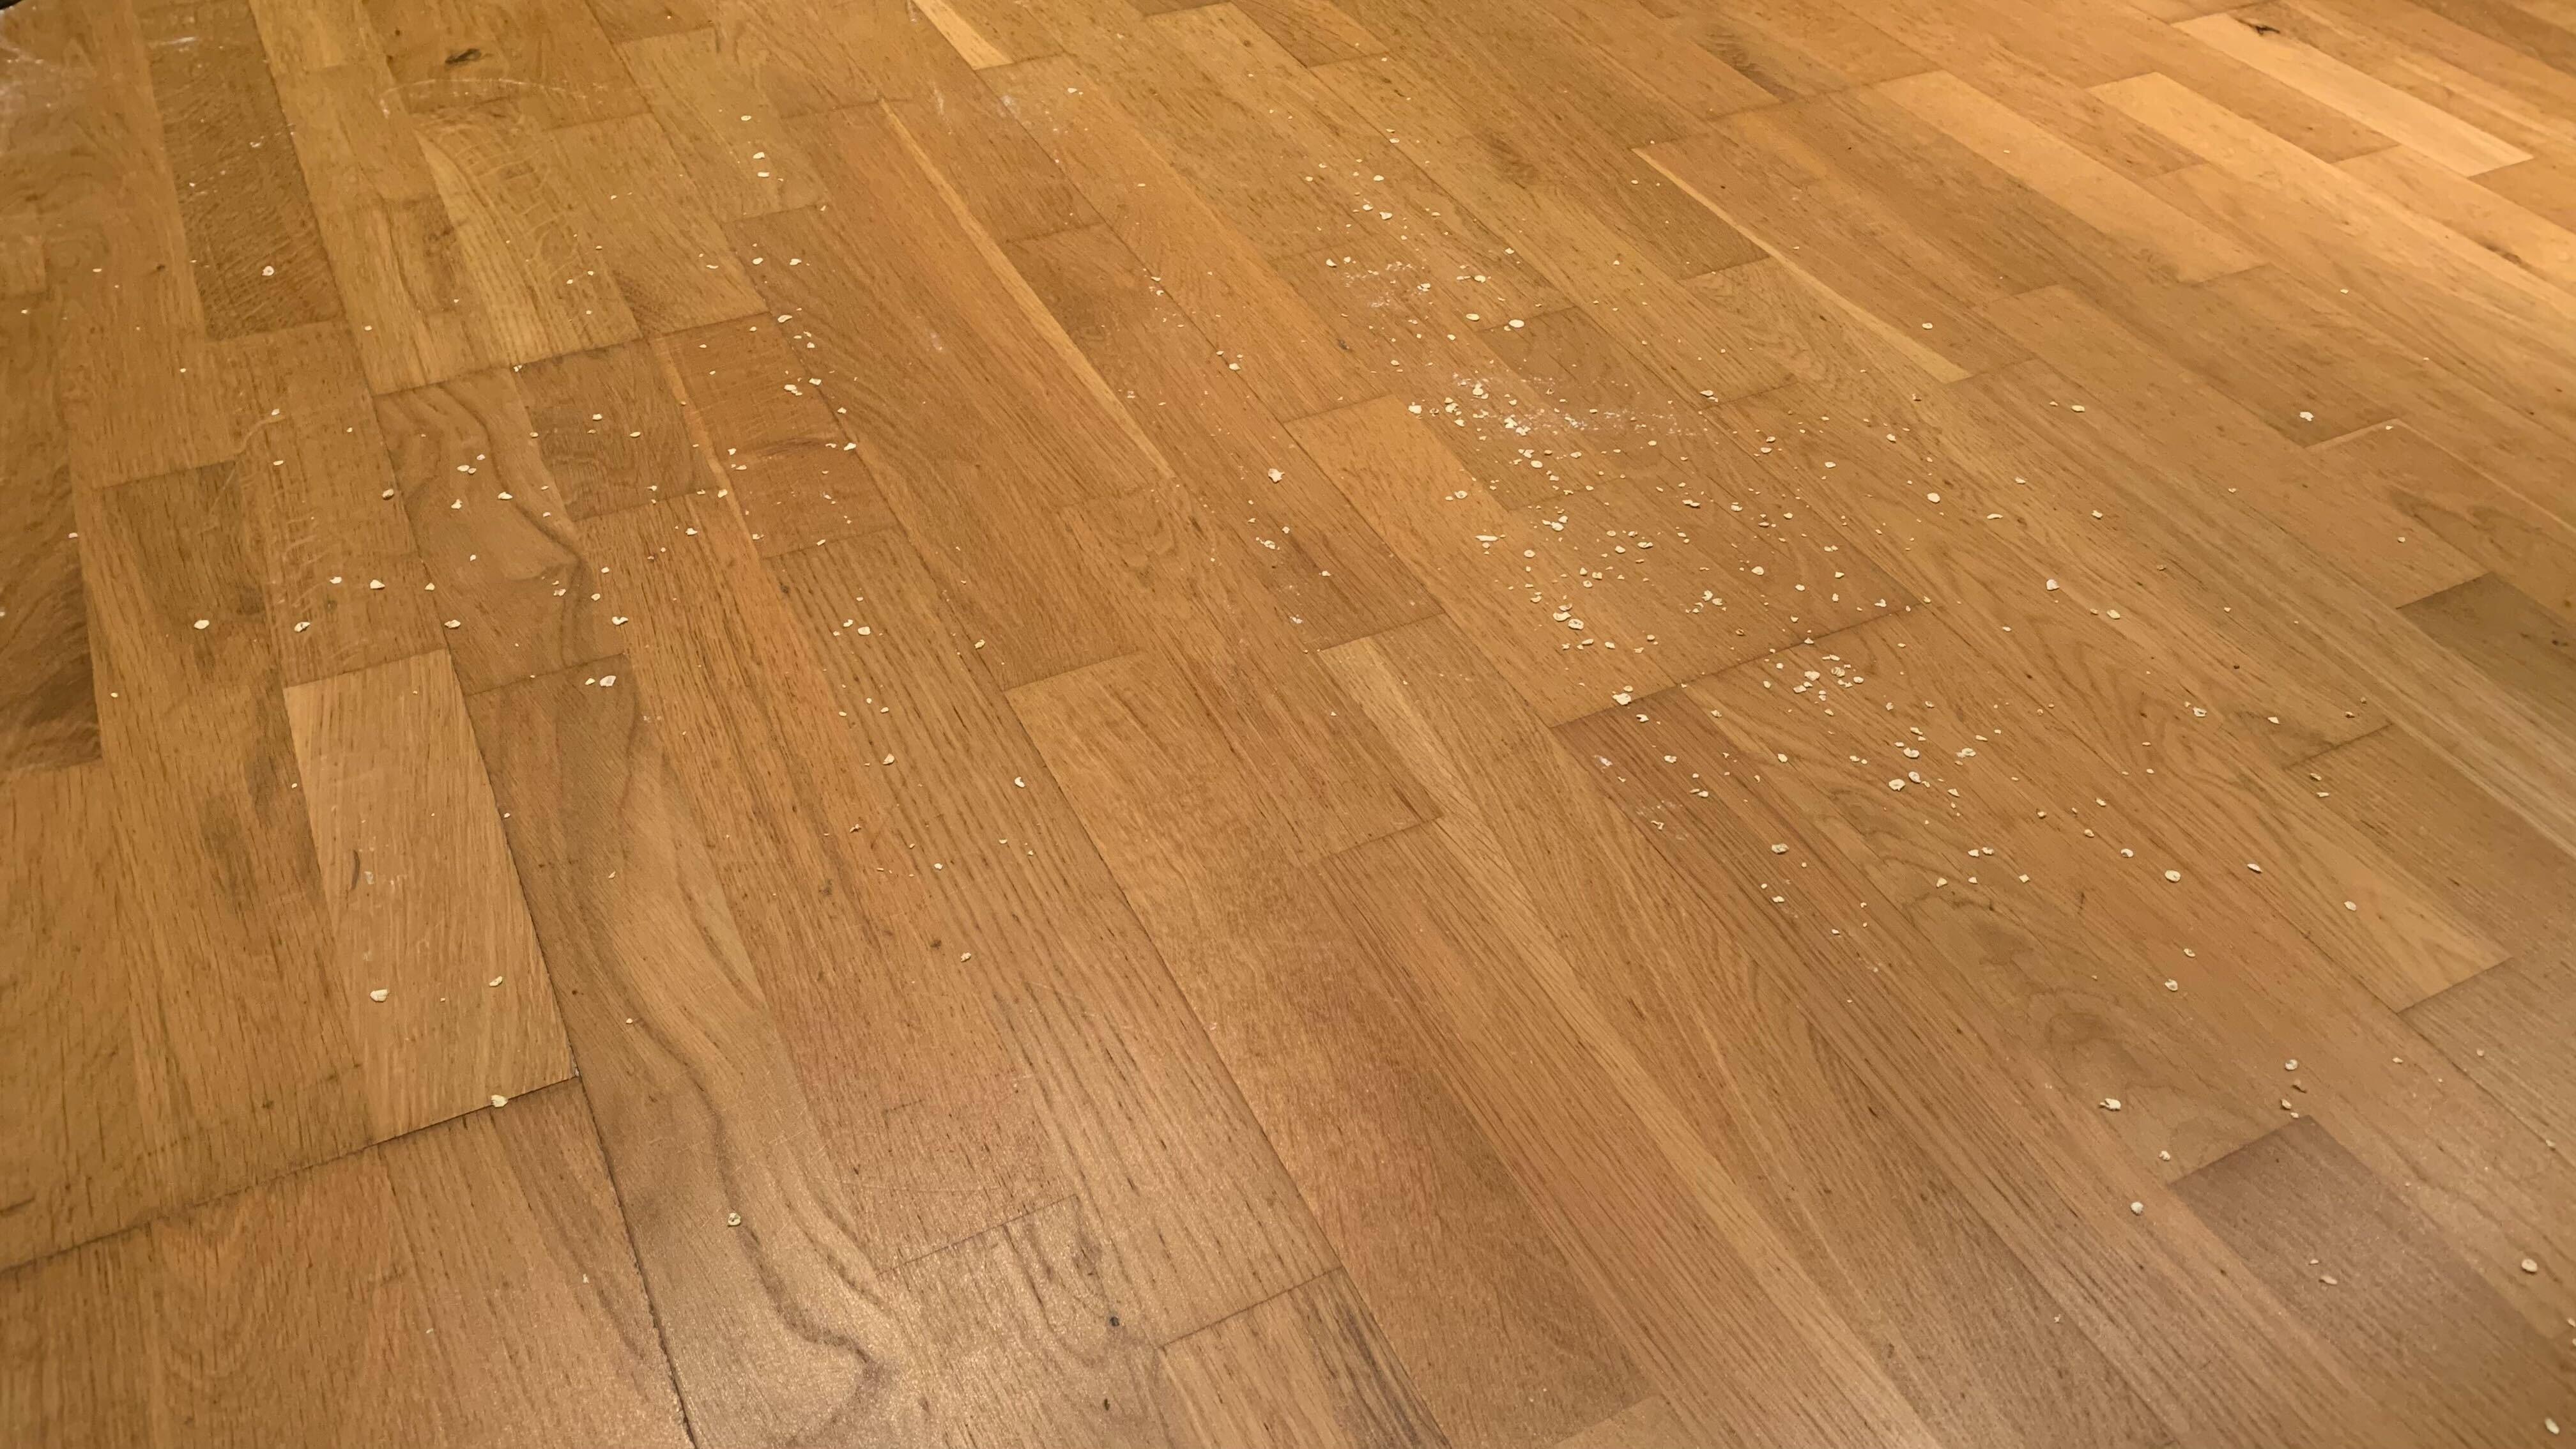 The floor with scattered oats and flour after the iRobot Roomba Combo j7+ cleaned up a heavy spill